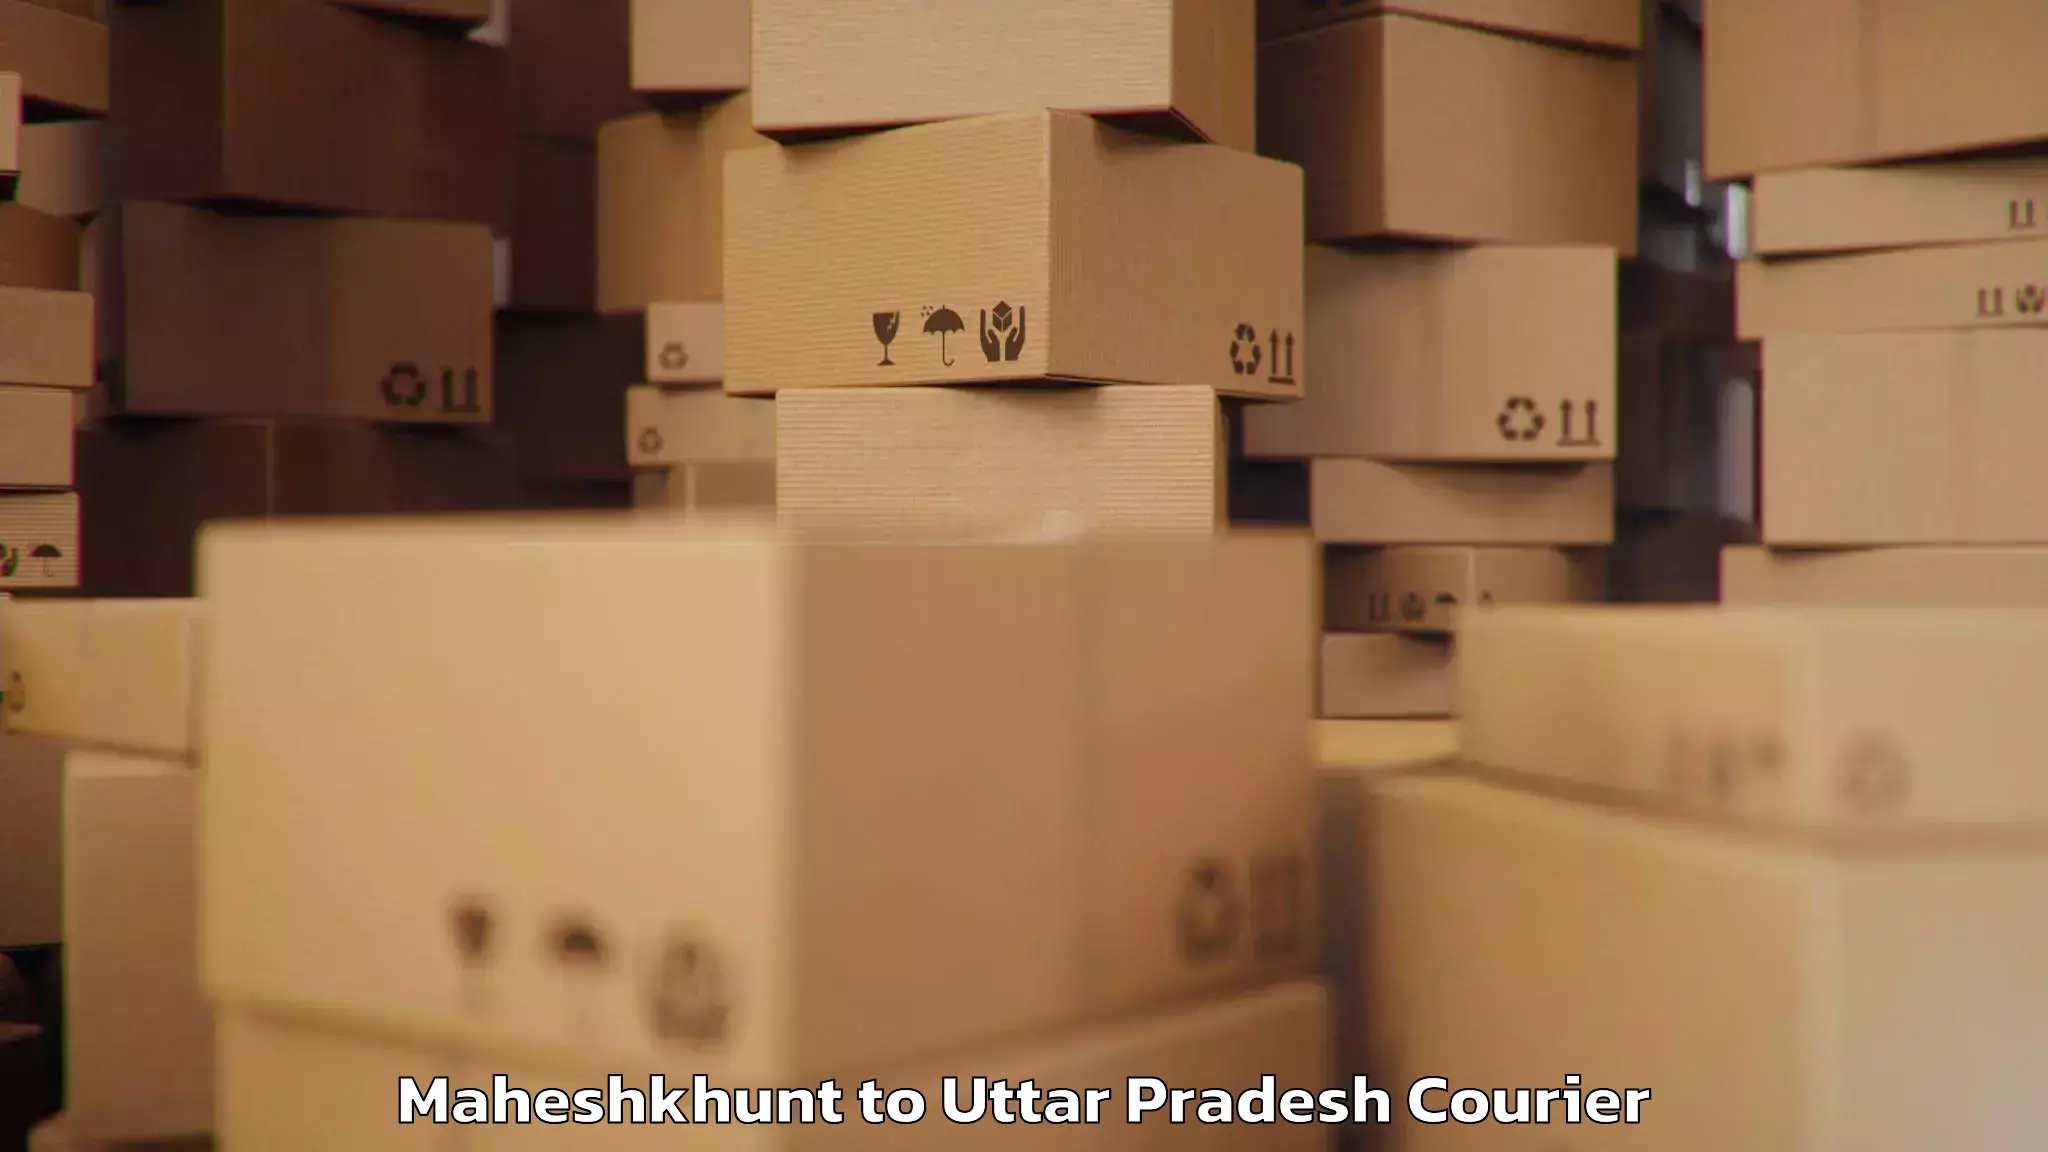 Personal effects shipping in Maheshkhunt to Agra